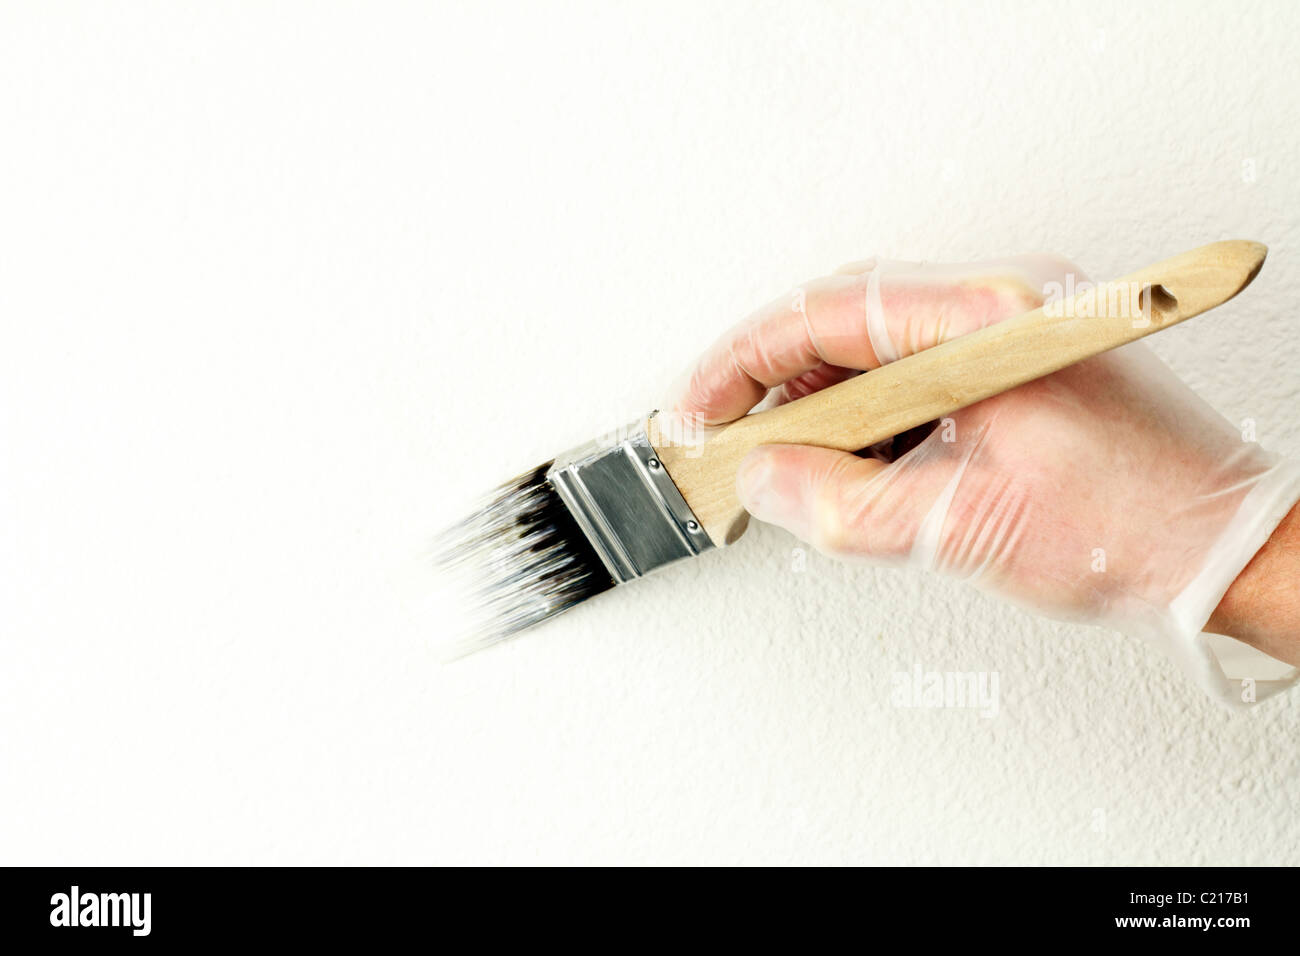 Hand With Glove Painting Touch Up Paint Interior Wall Repair Home